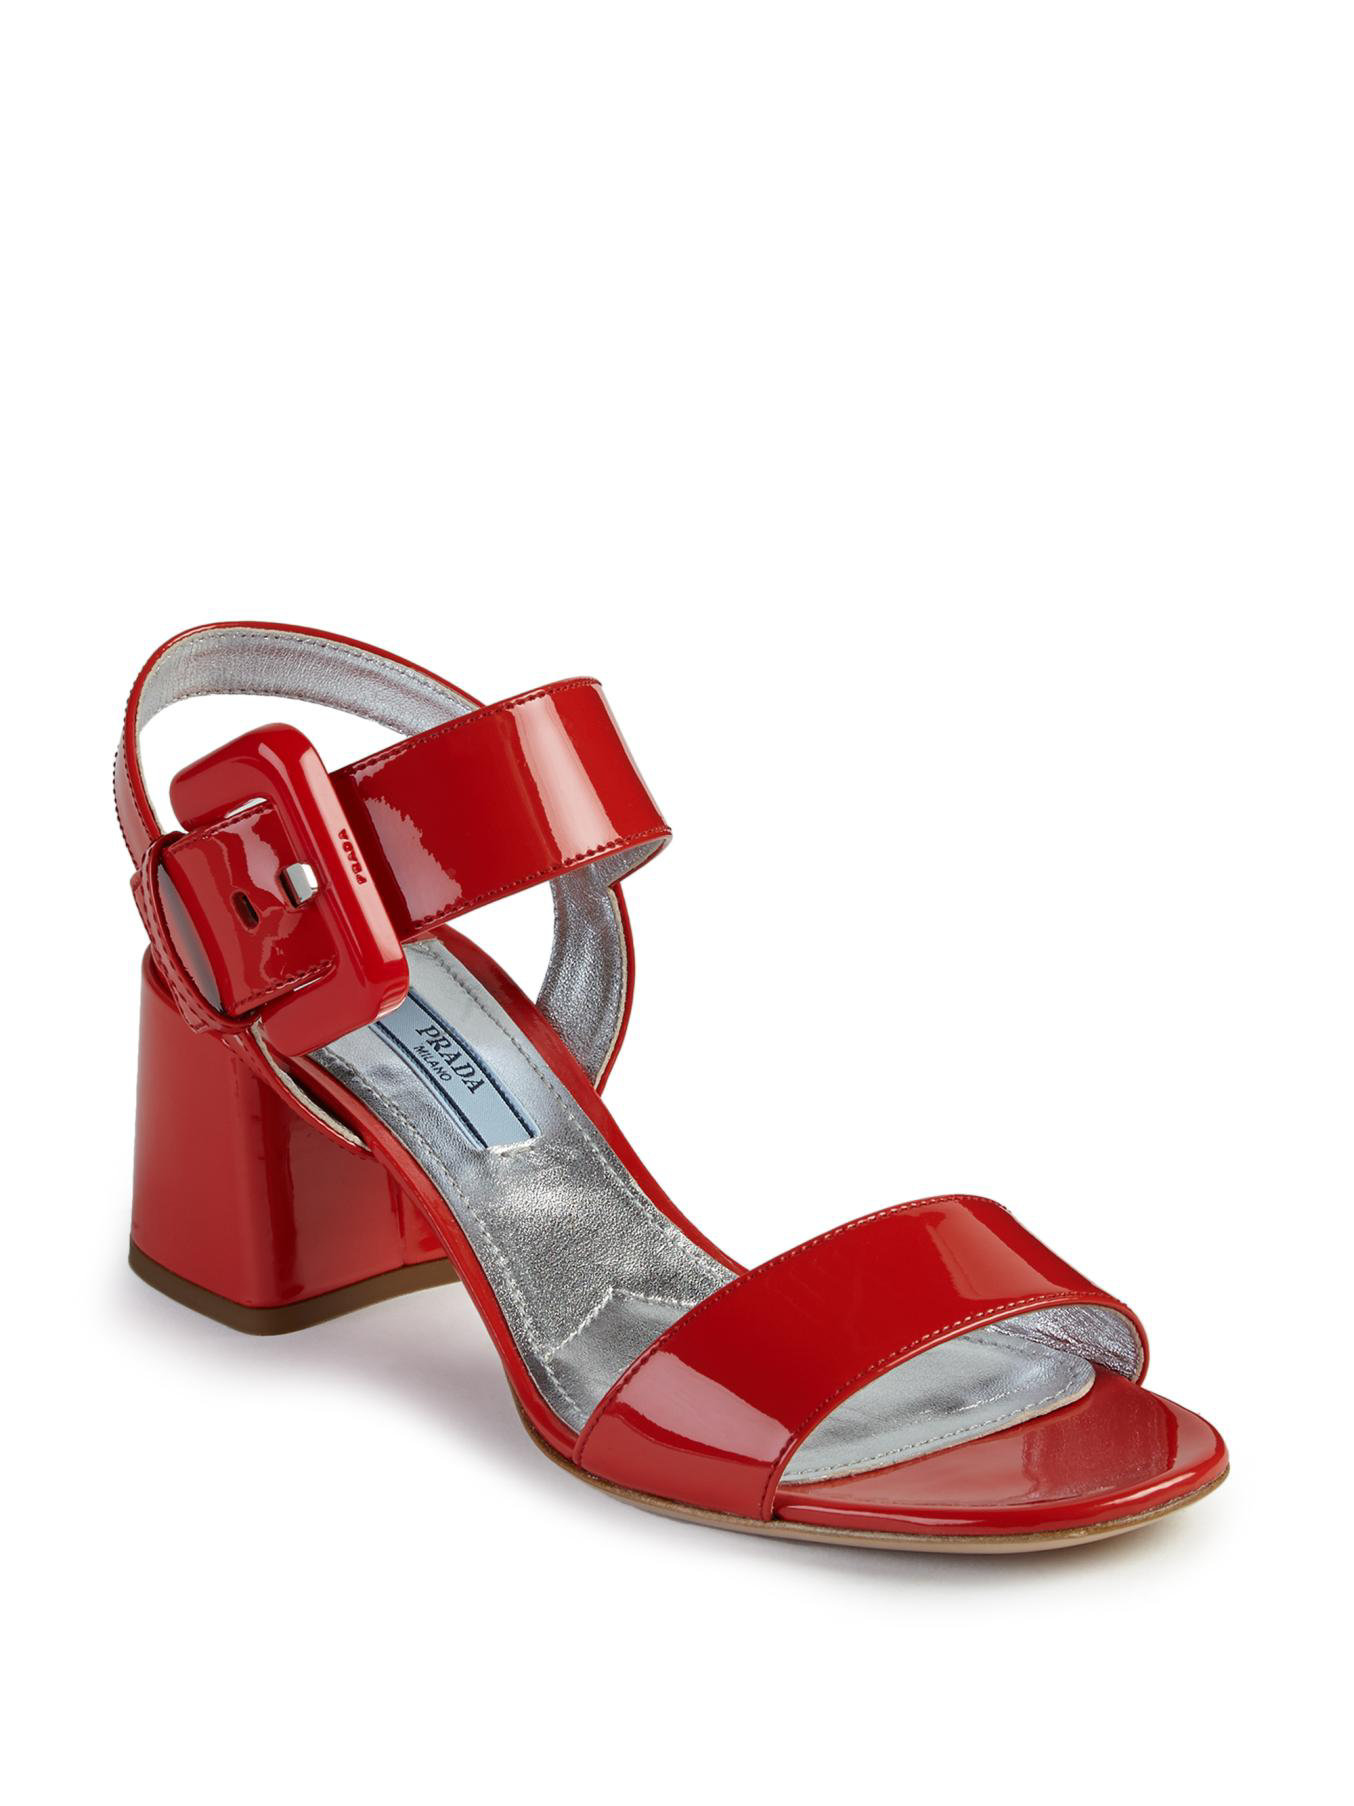 Prada Patent Leather Mid-heel Sandals in Red | Lyst